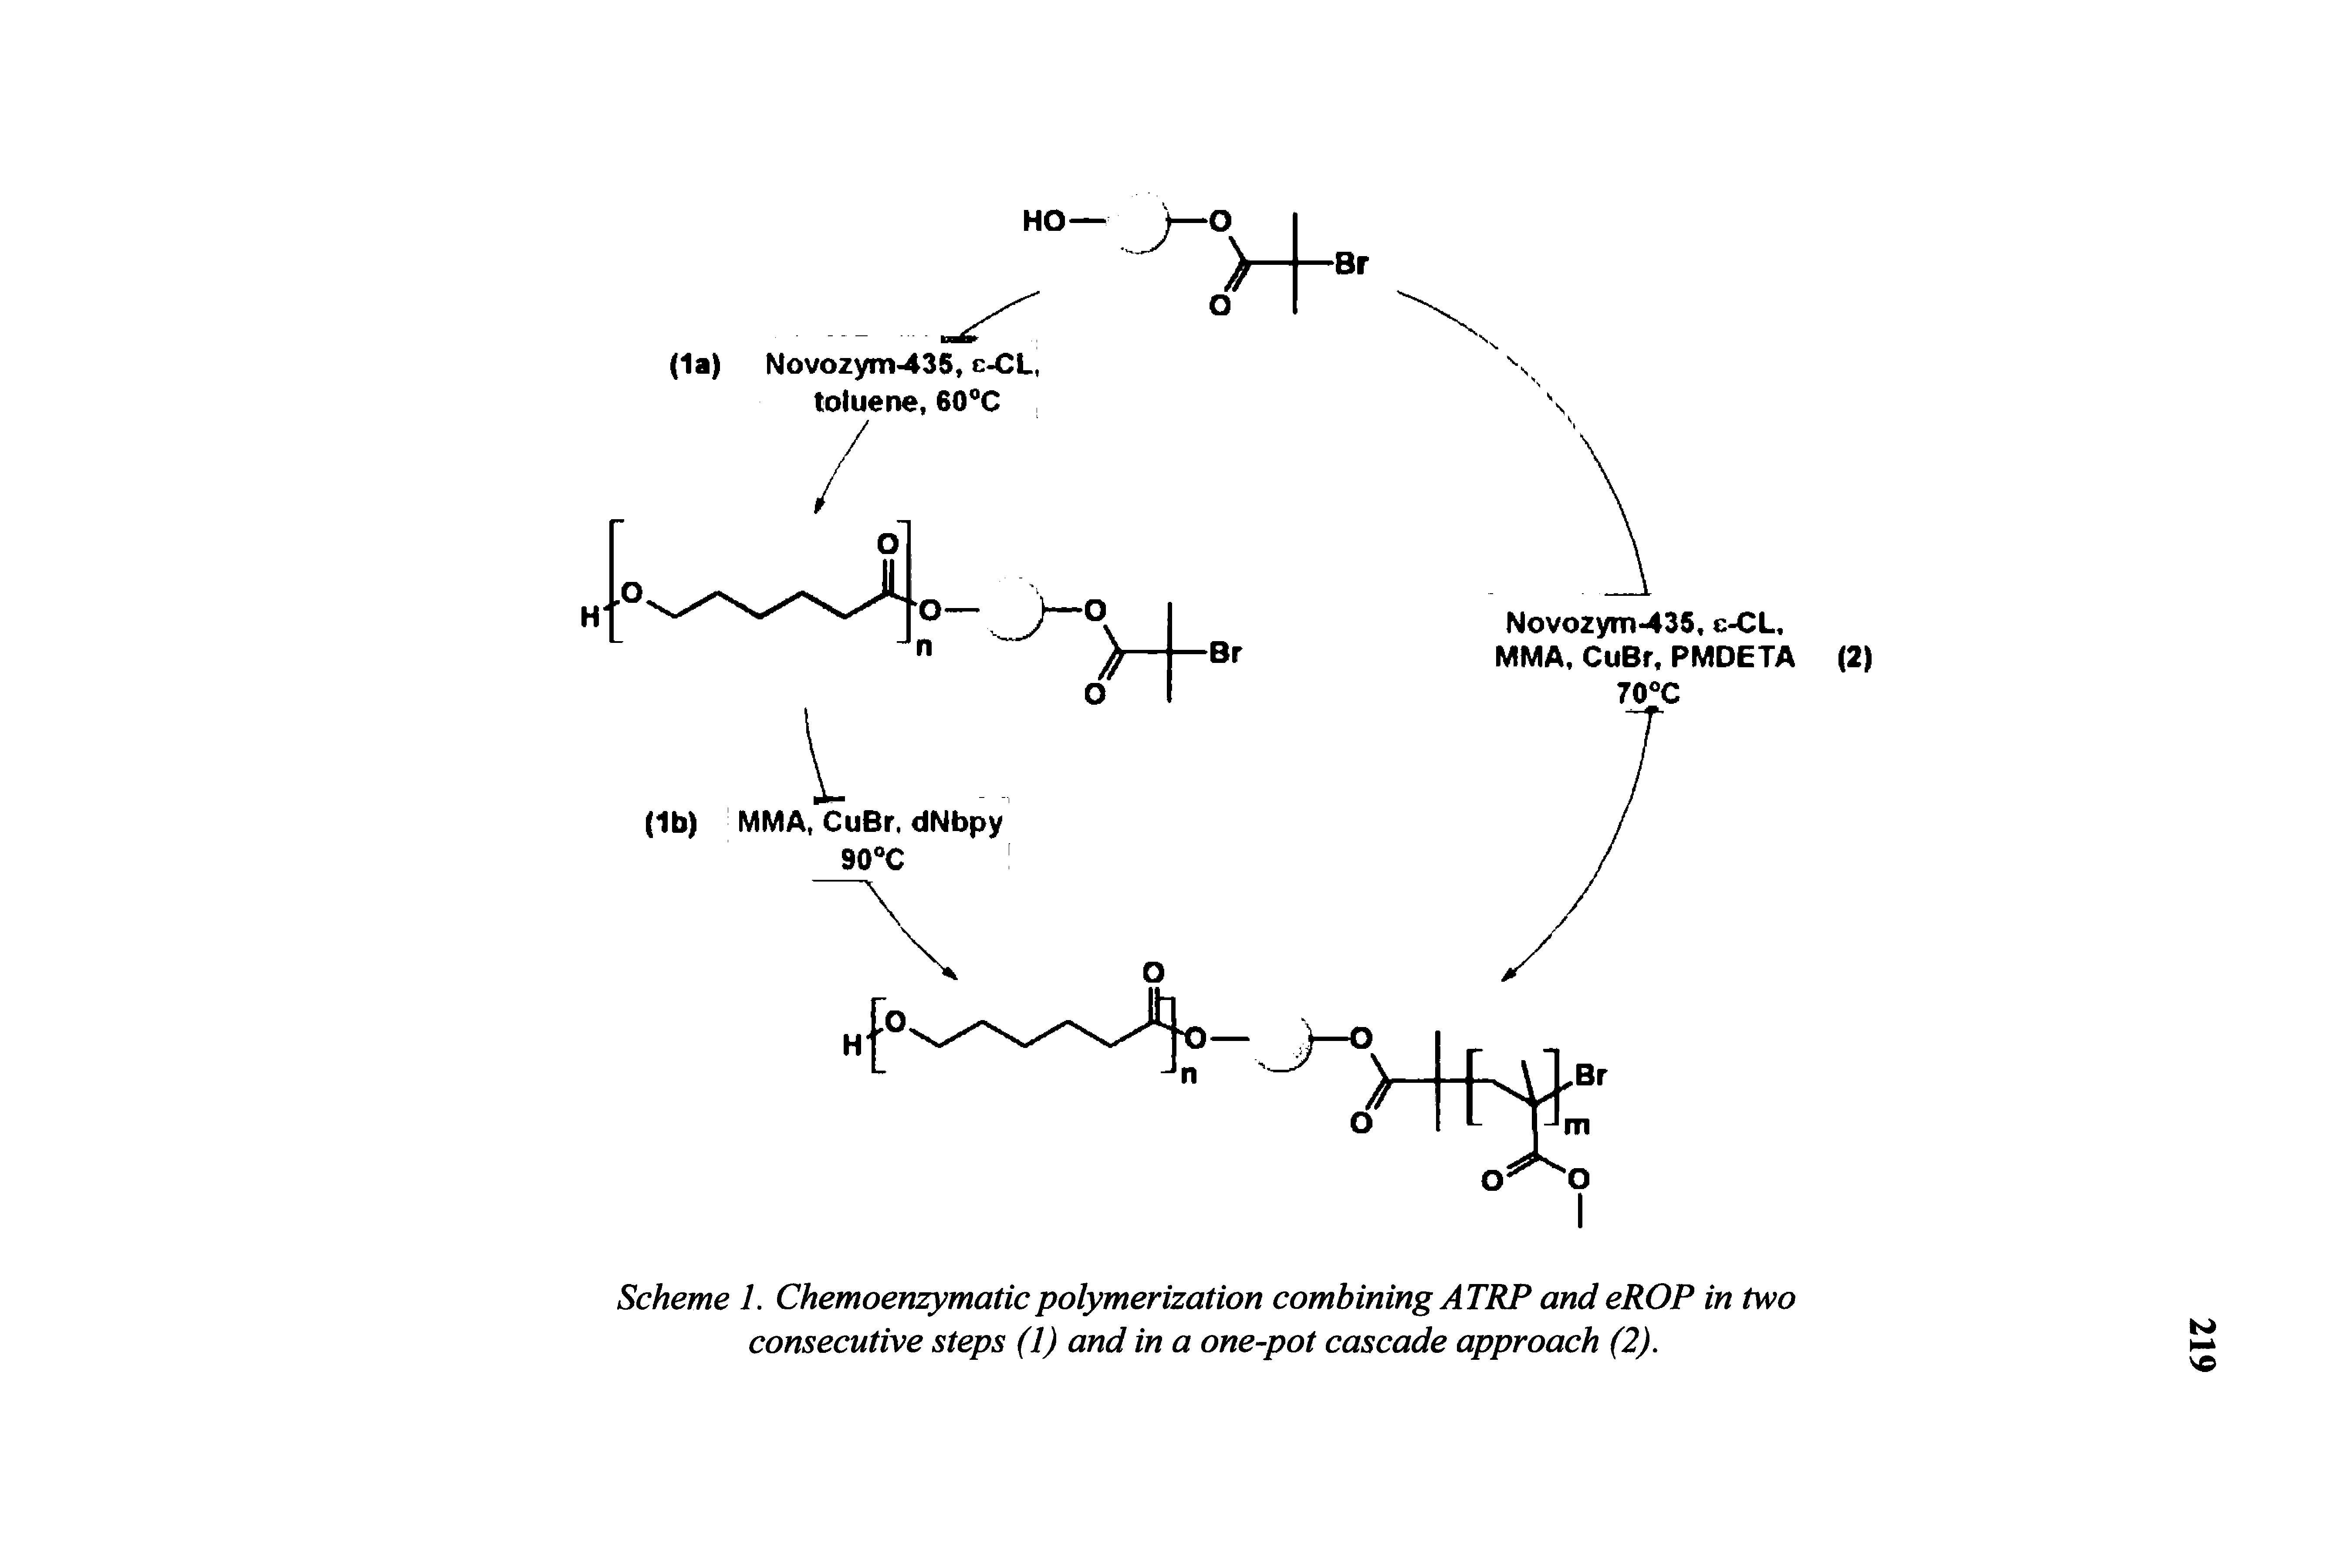 Scheme 1. Chemoenzymaticpolymerization combining ATRP and eROP in two consecutive steps (1) and in a one-pot cascade approach (2).